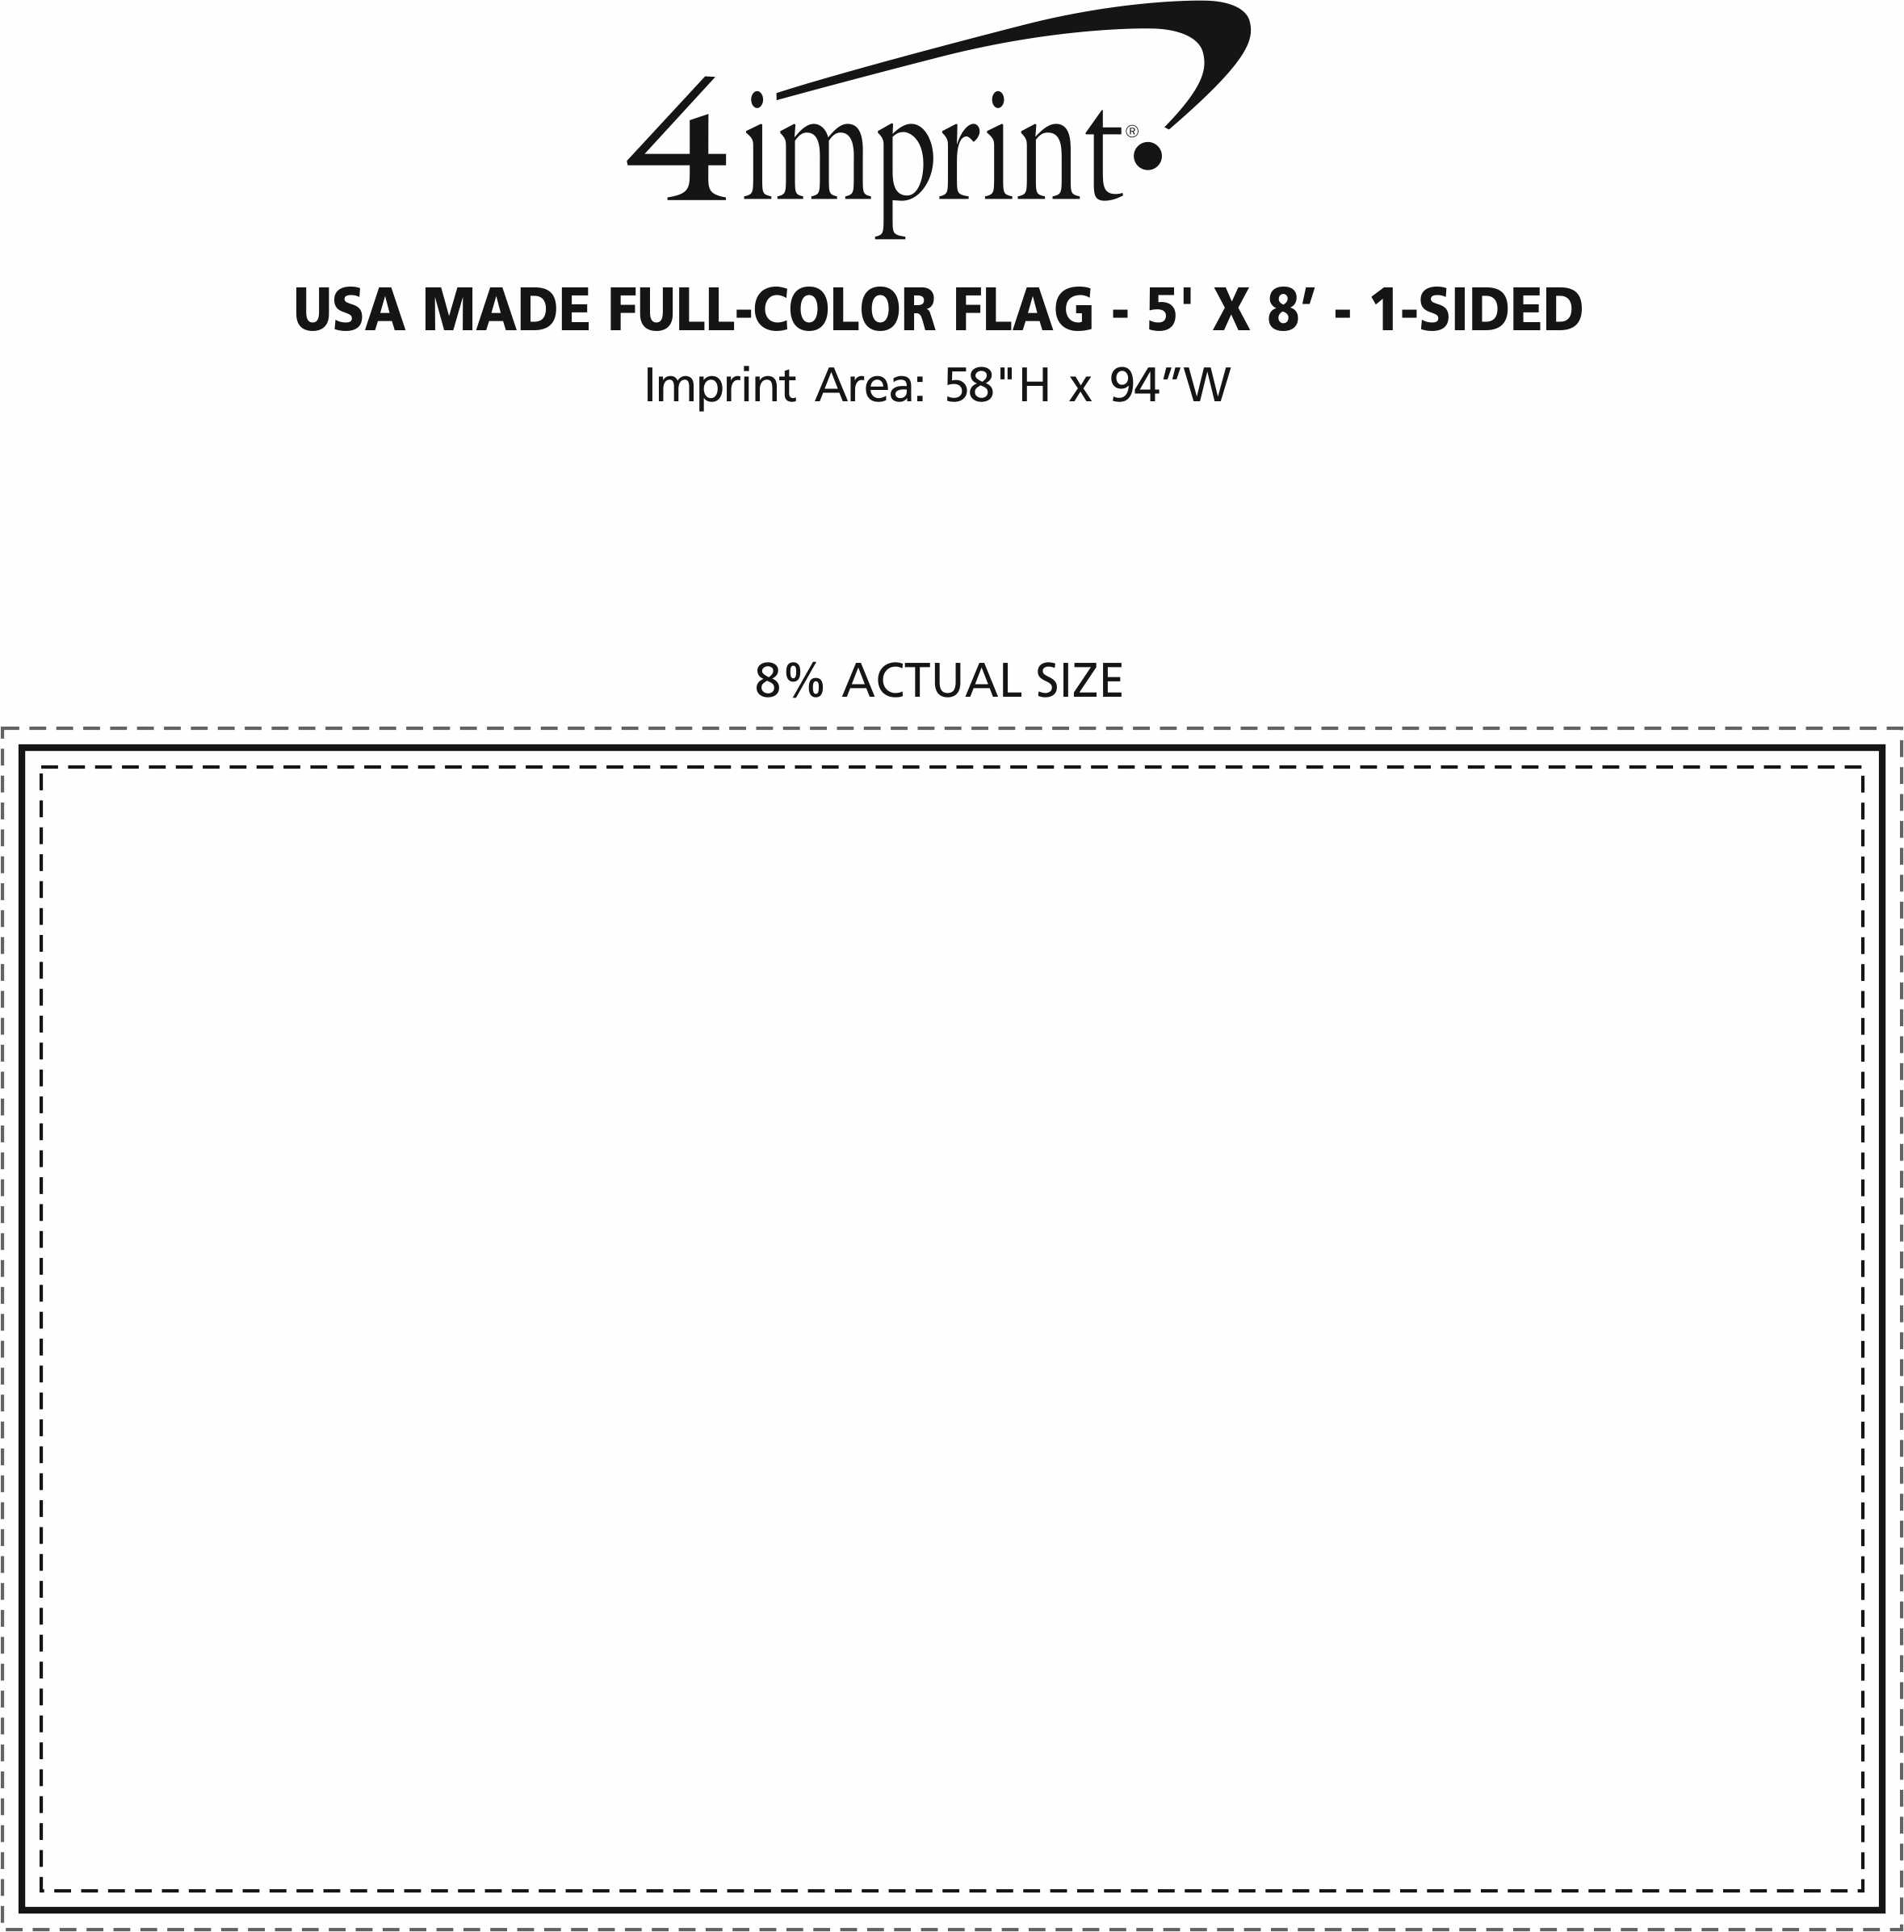 Imprint Area of USA Made Full-Color Flag with Grommets - 5’ x 8’ - 1-Sided